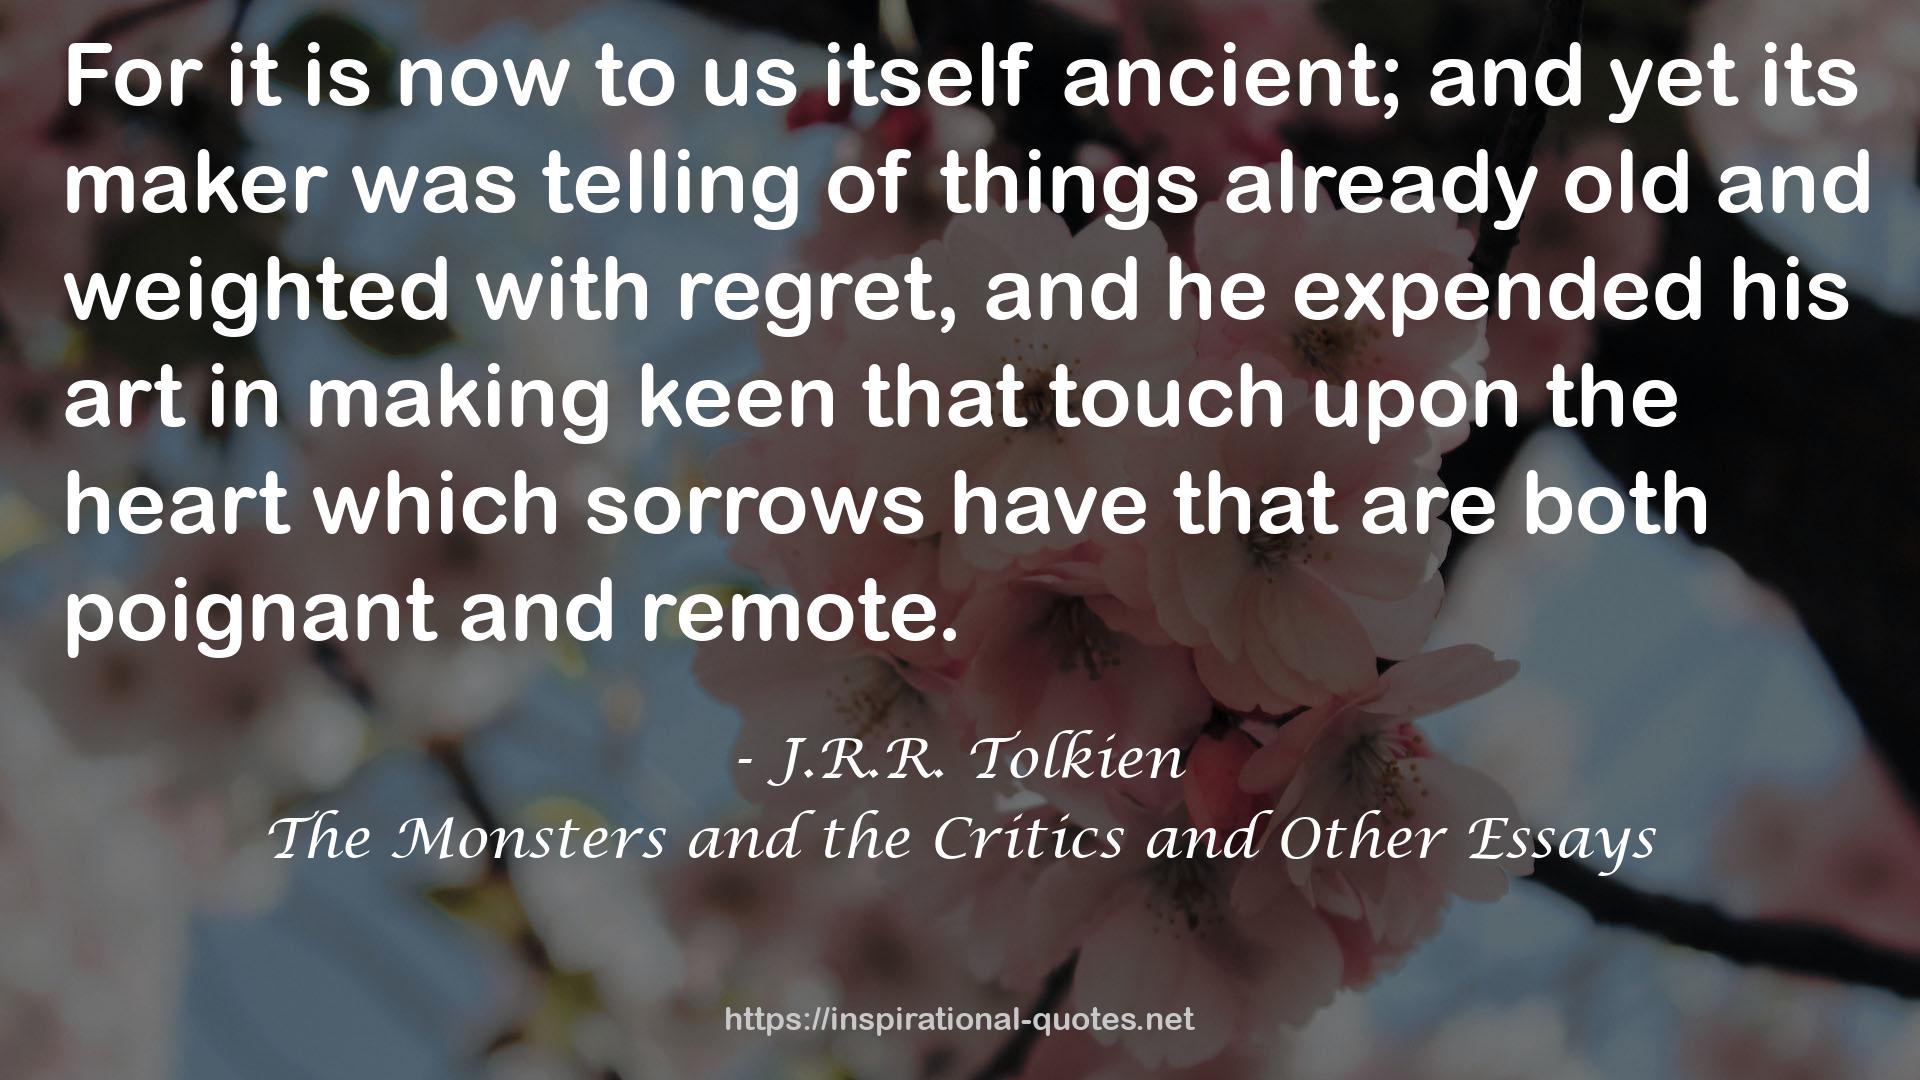 The Monsters and the Critics and Other Essays QUOTES